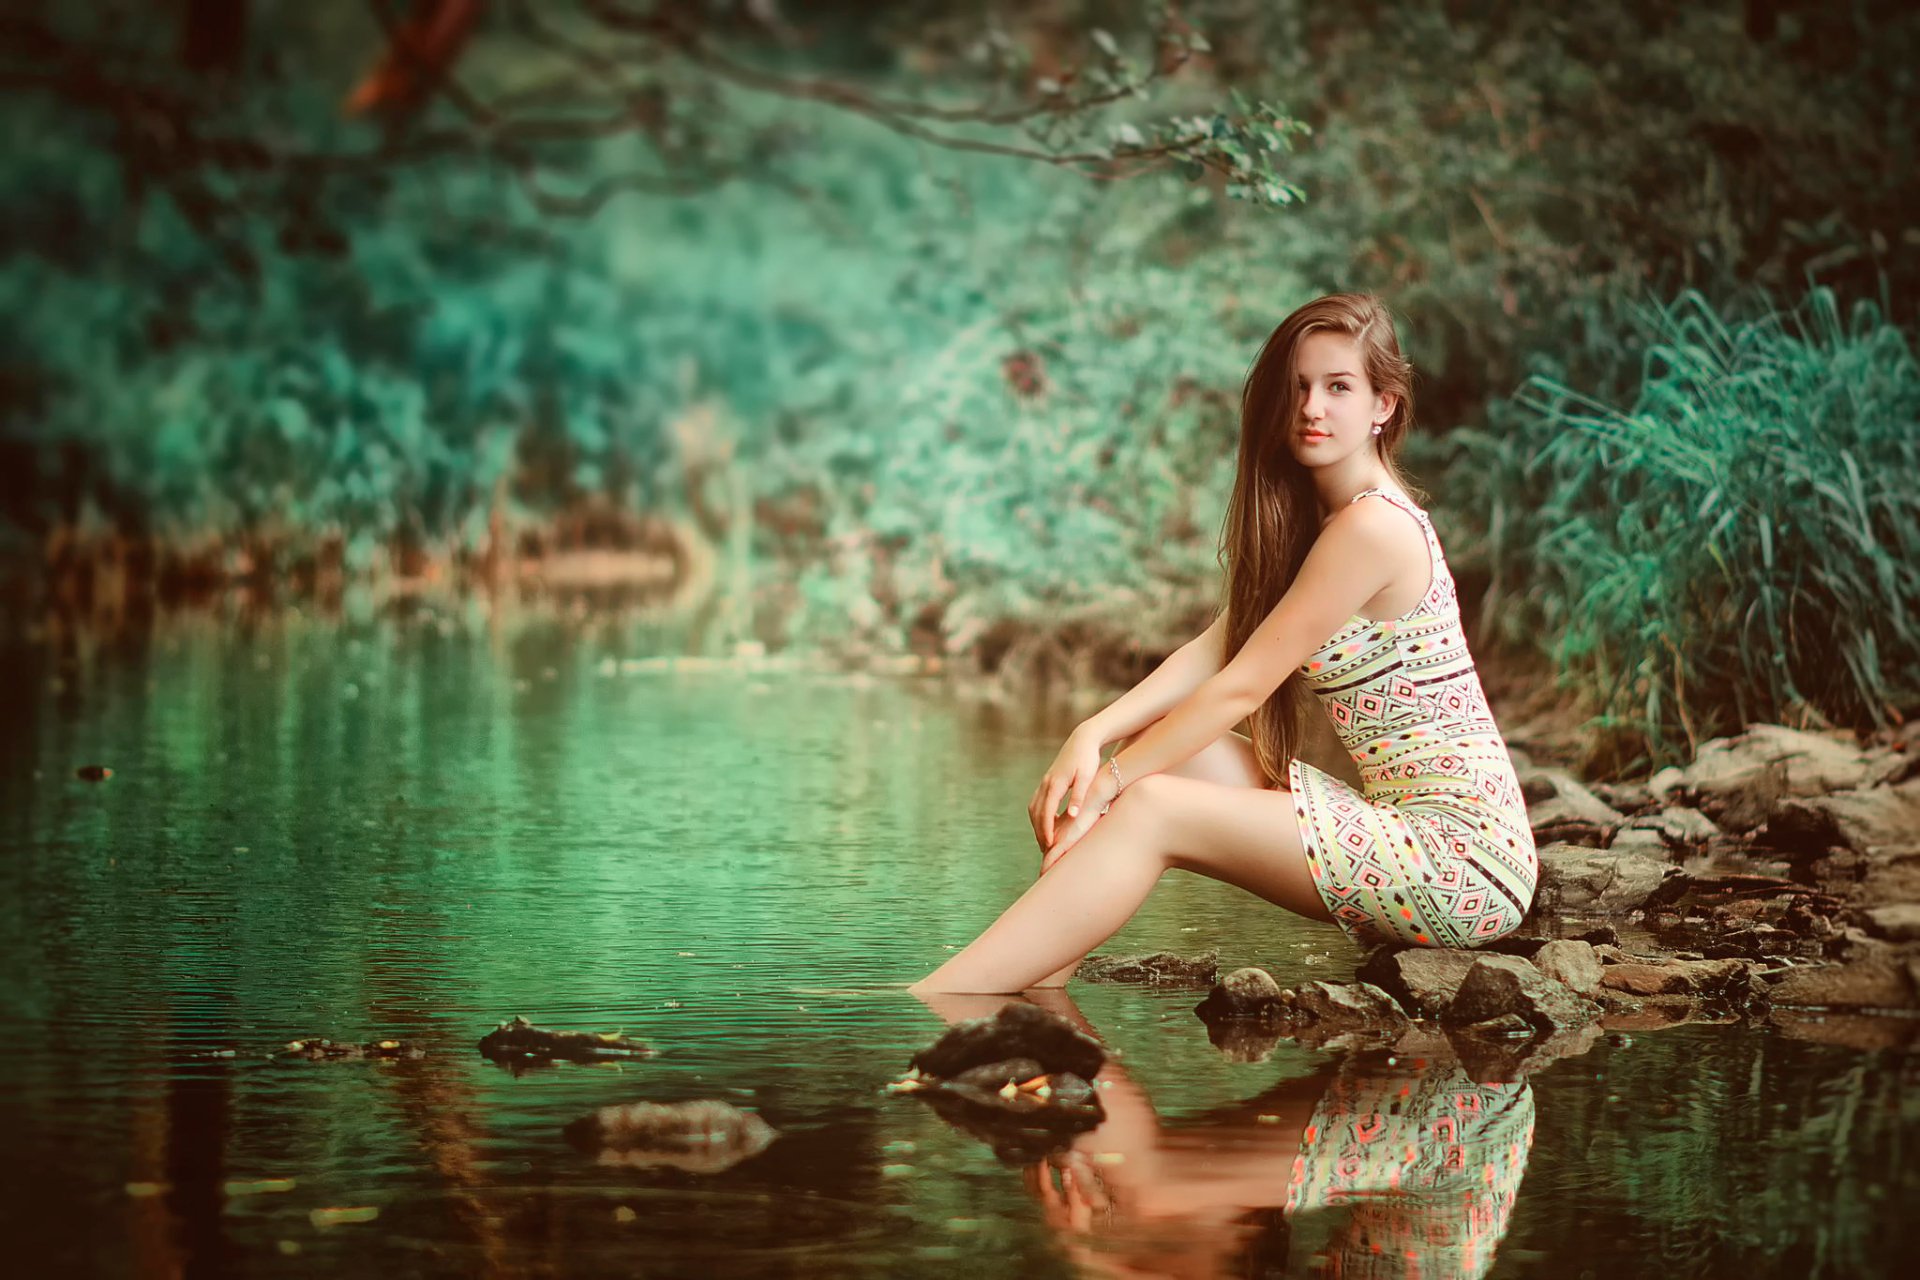 HD desktop wallpaper featuring a serene woman sitting by a tranquil forest pond, reflecting a contemplative mood.